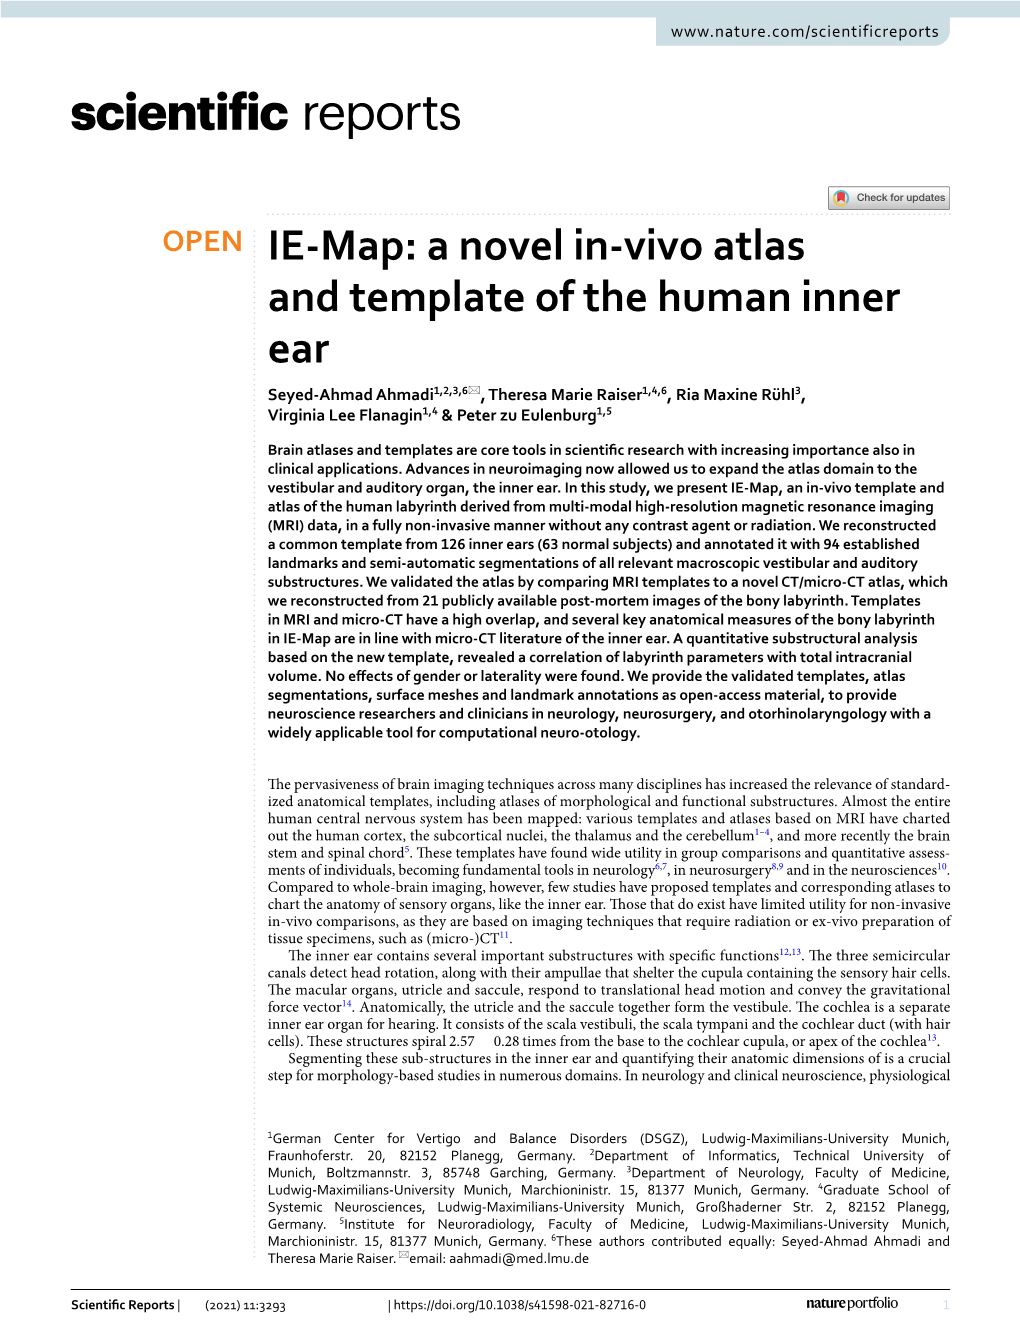 A Novel In-Vivo Atlas and Template of the Human Inner